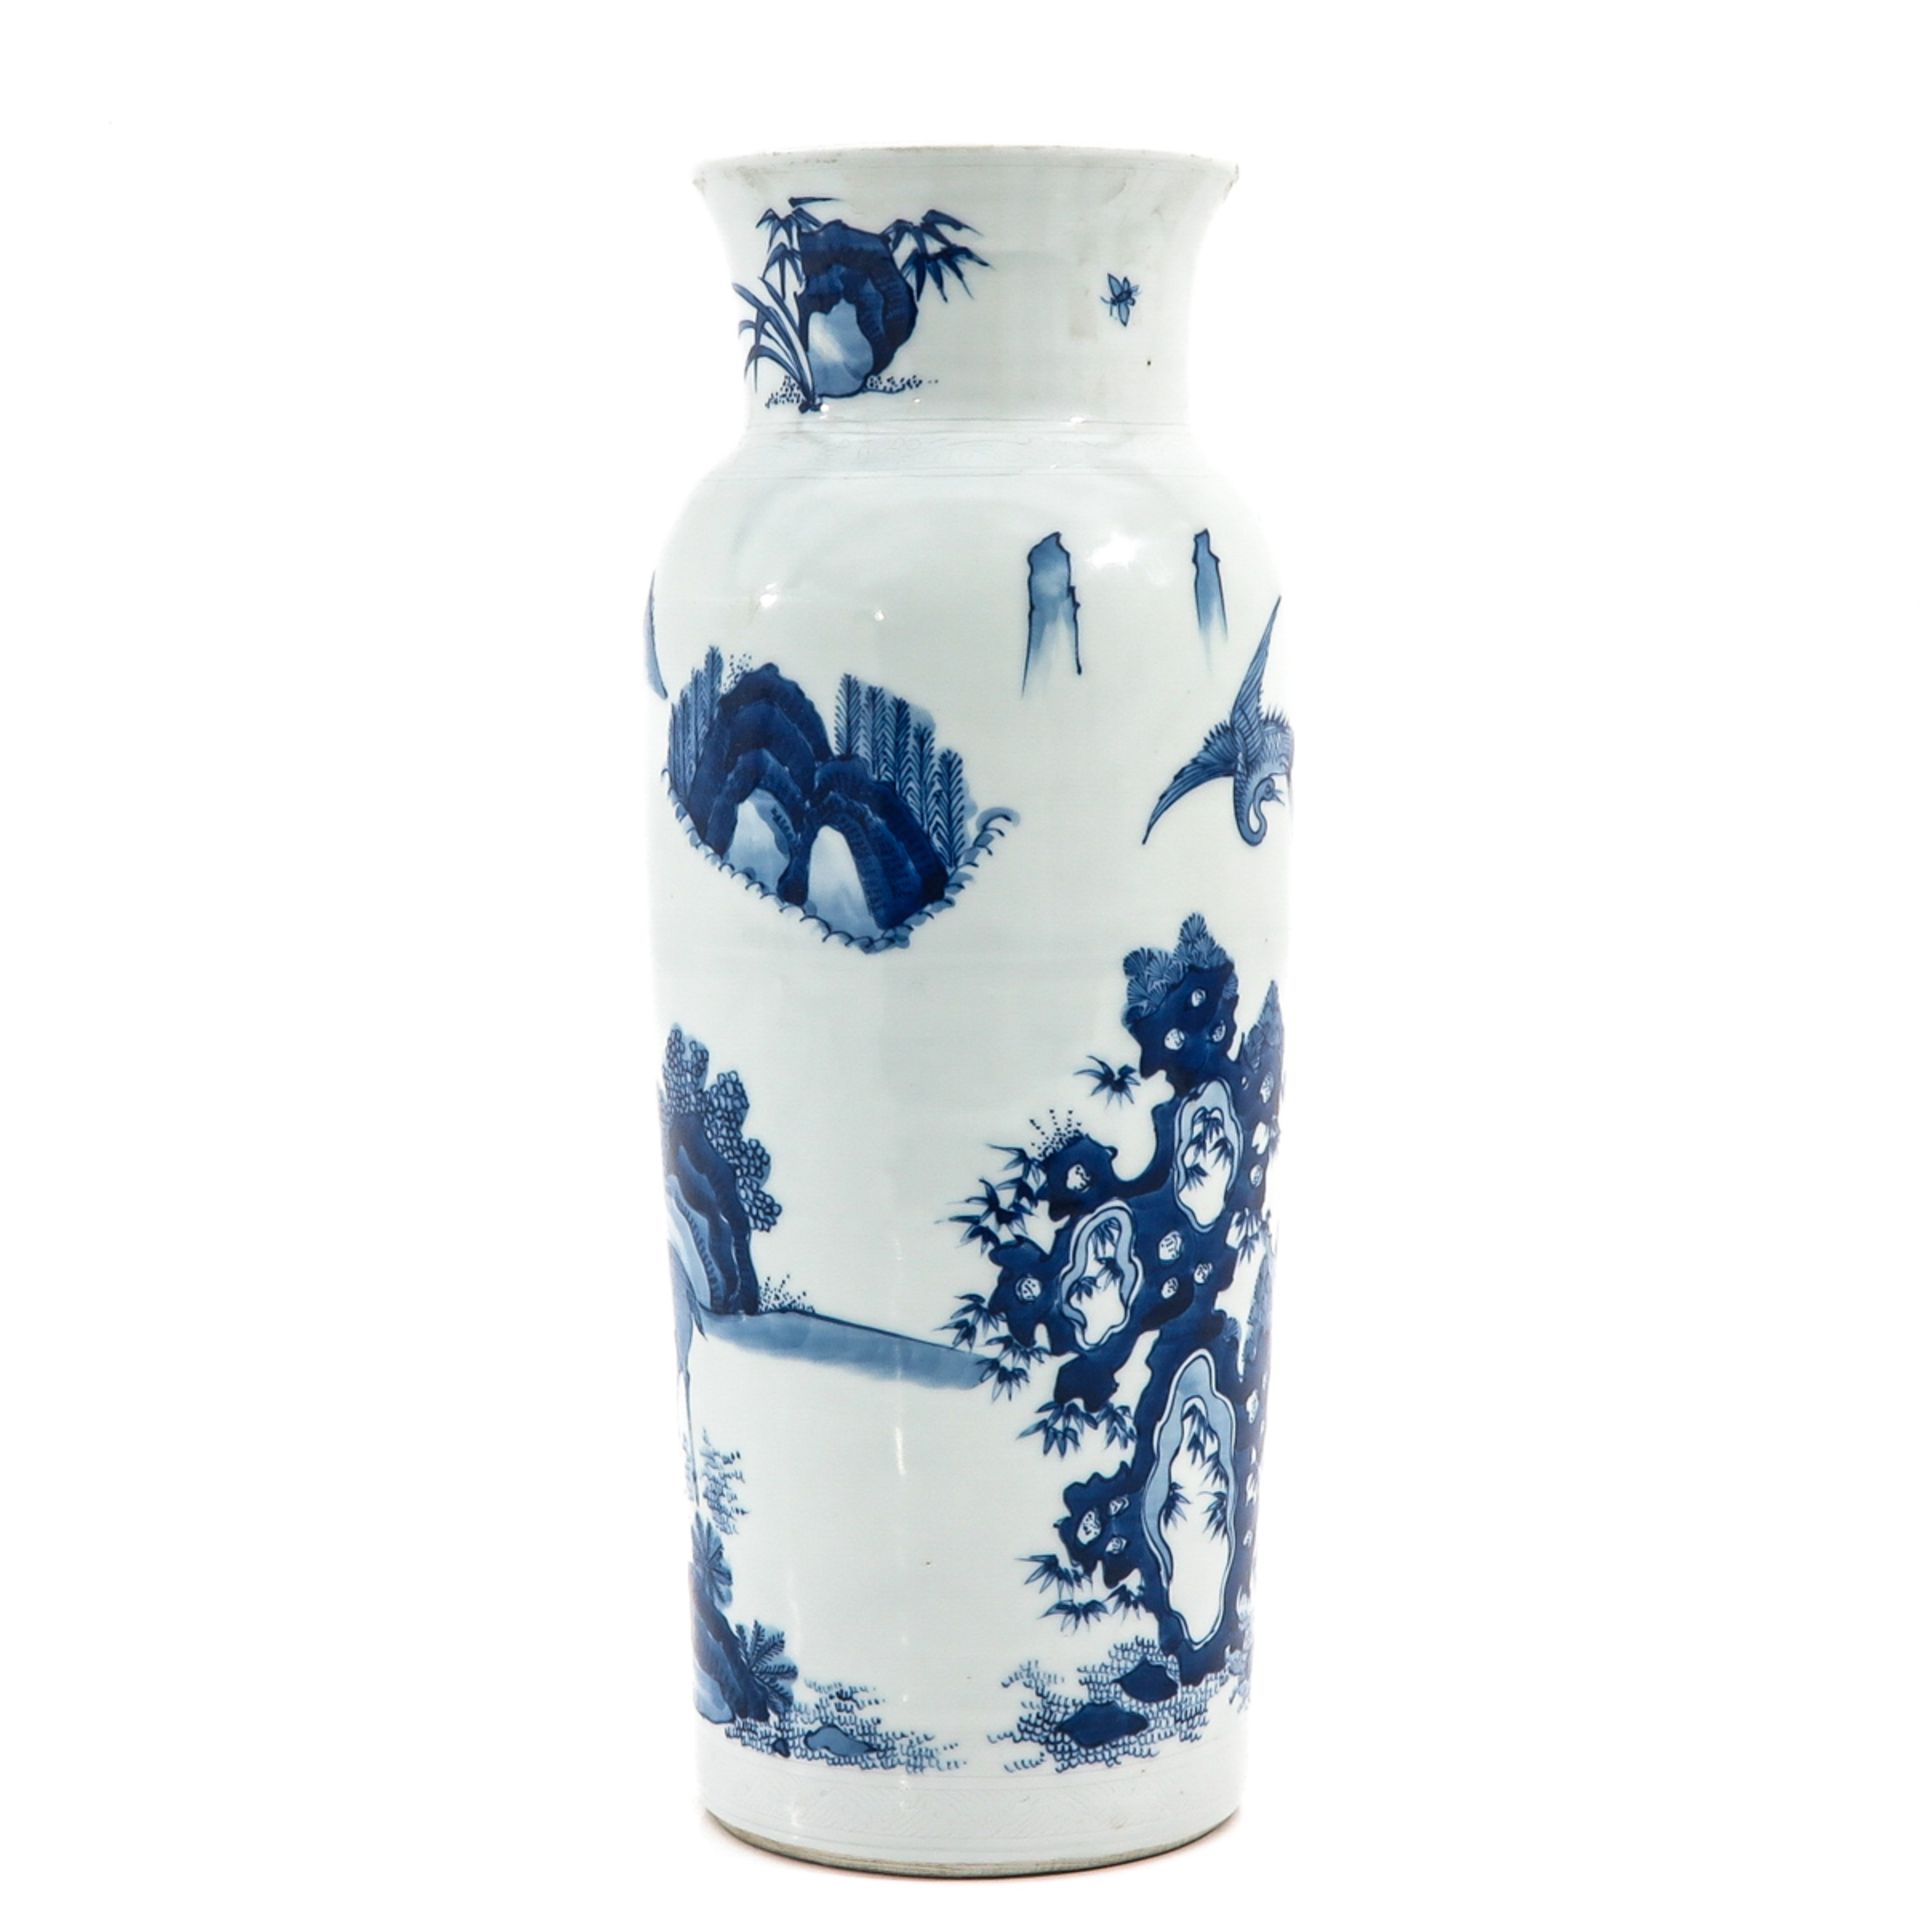 A Blue and White Rouleau Vase - Image 3 of 9